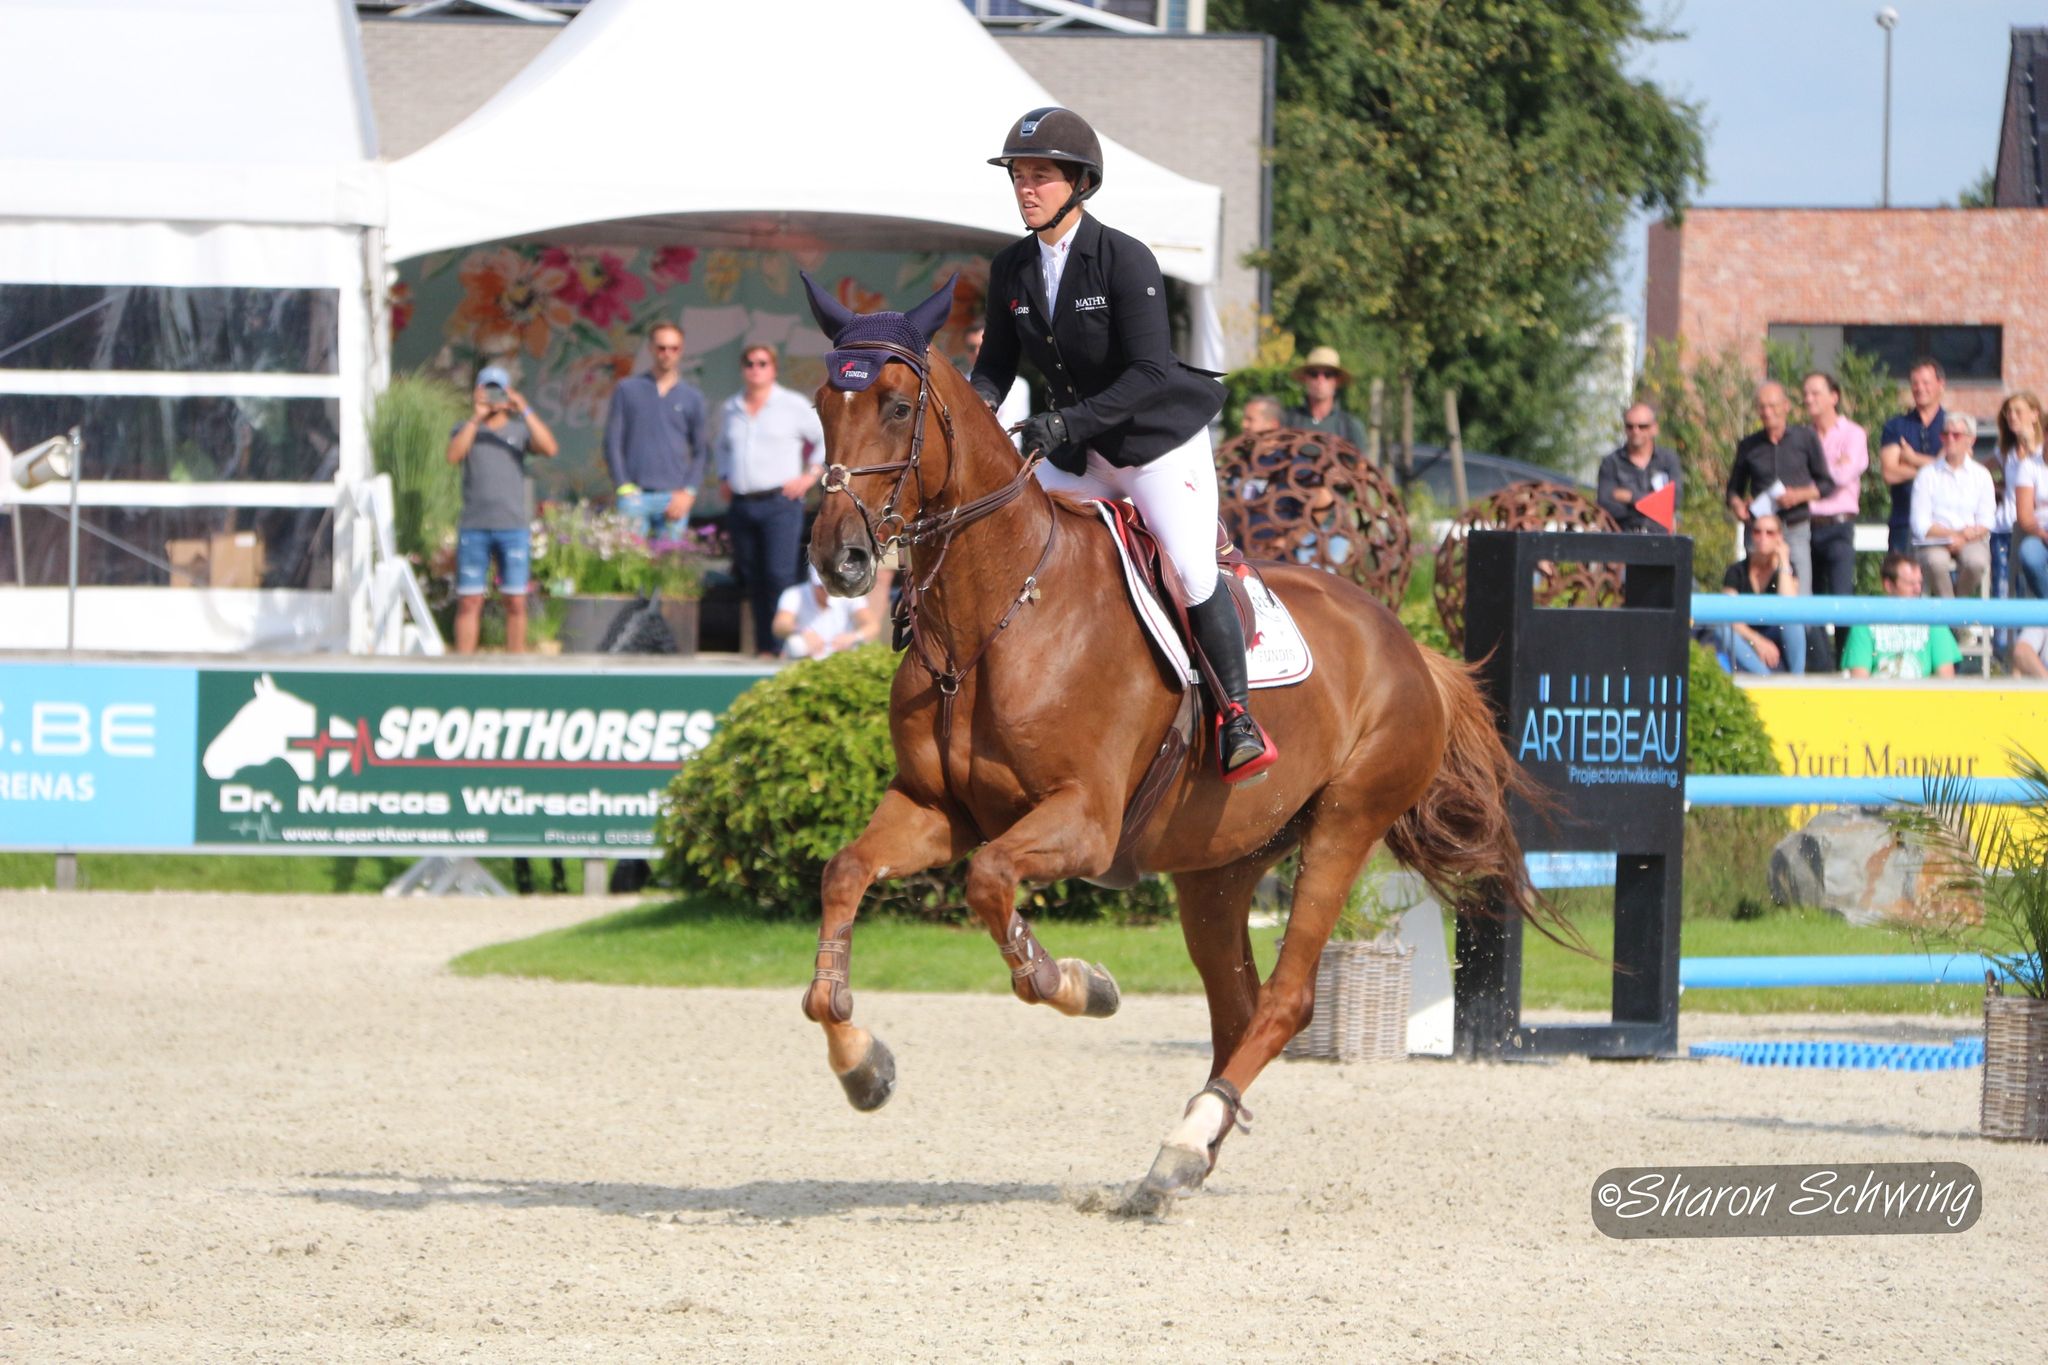 Charlotte Bettendorf and Babacool kept their 'cool' in the Grand Prix of the Sunshine Tour